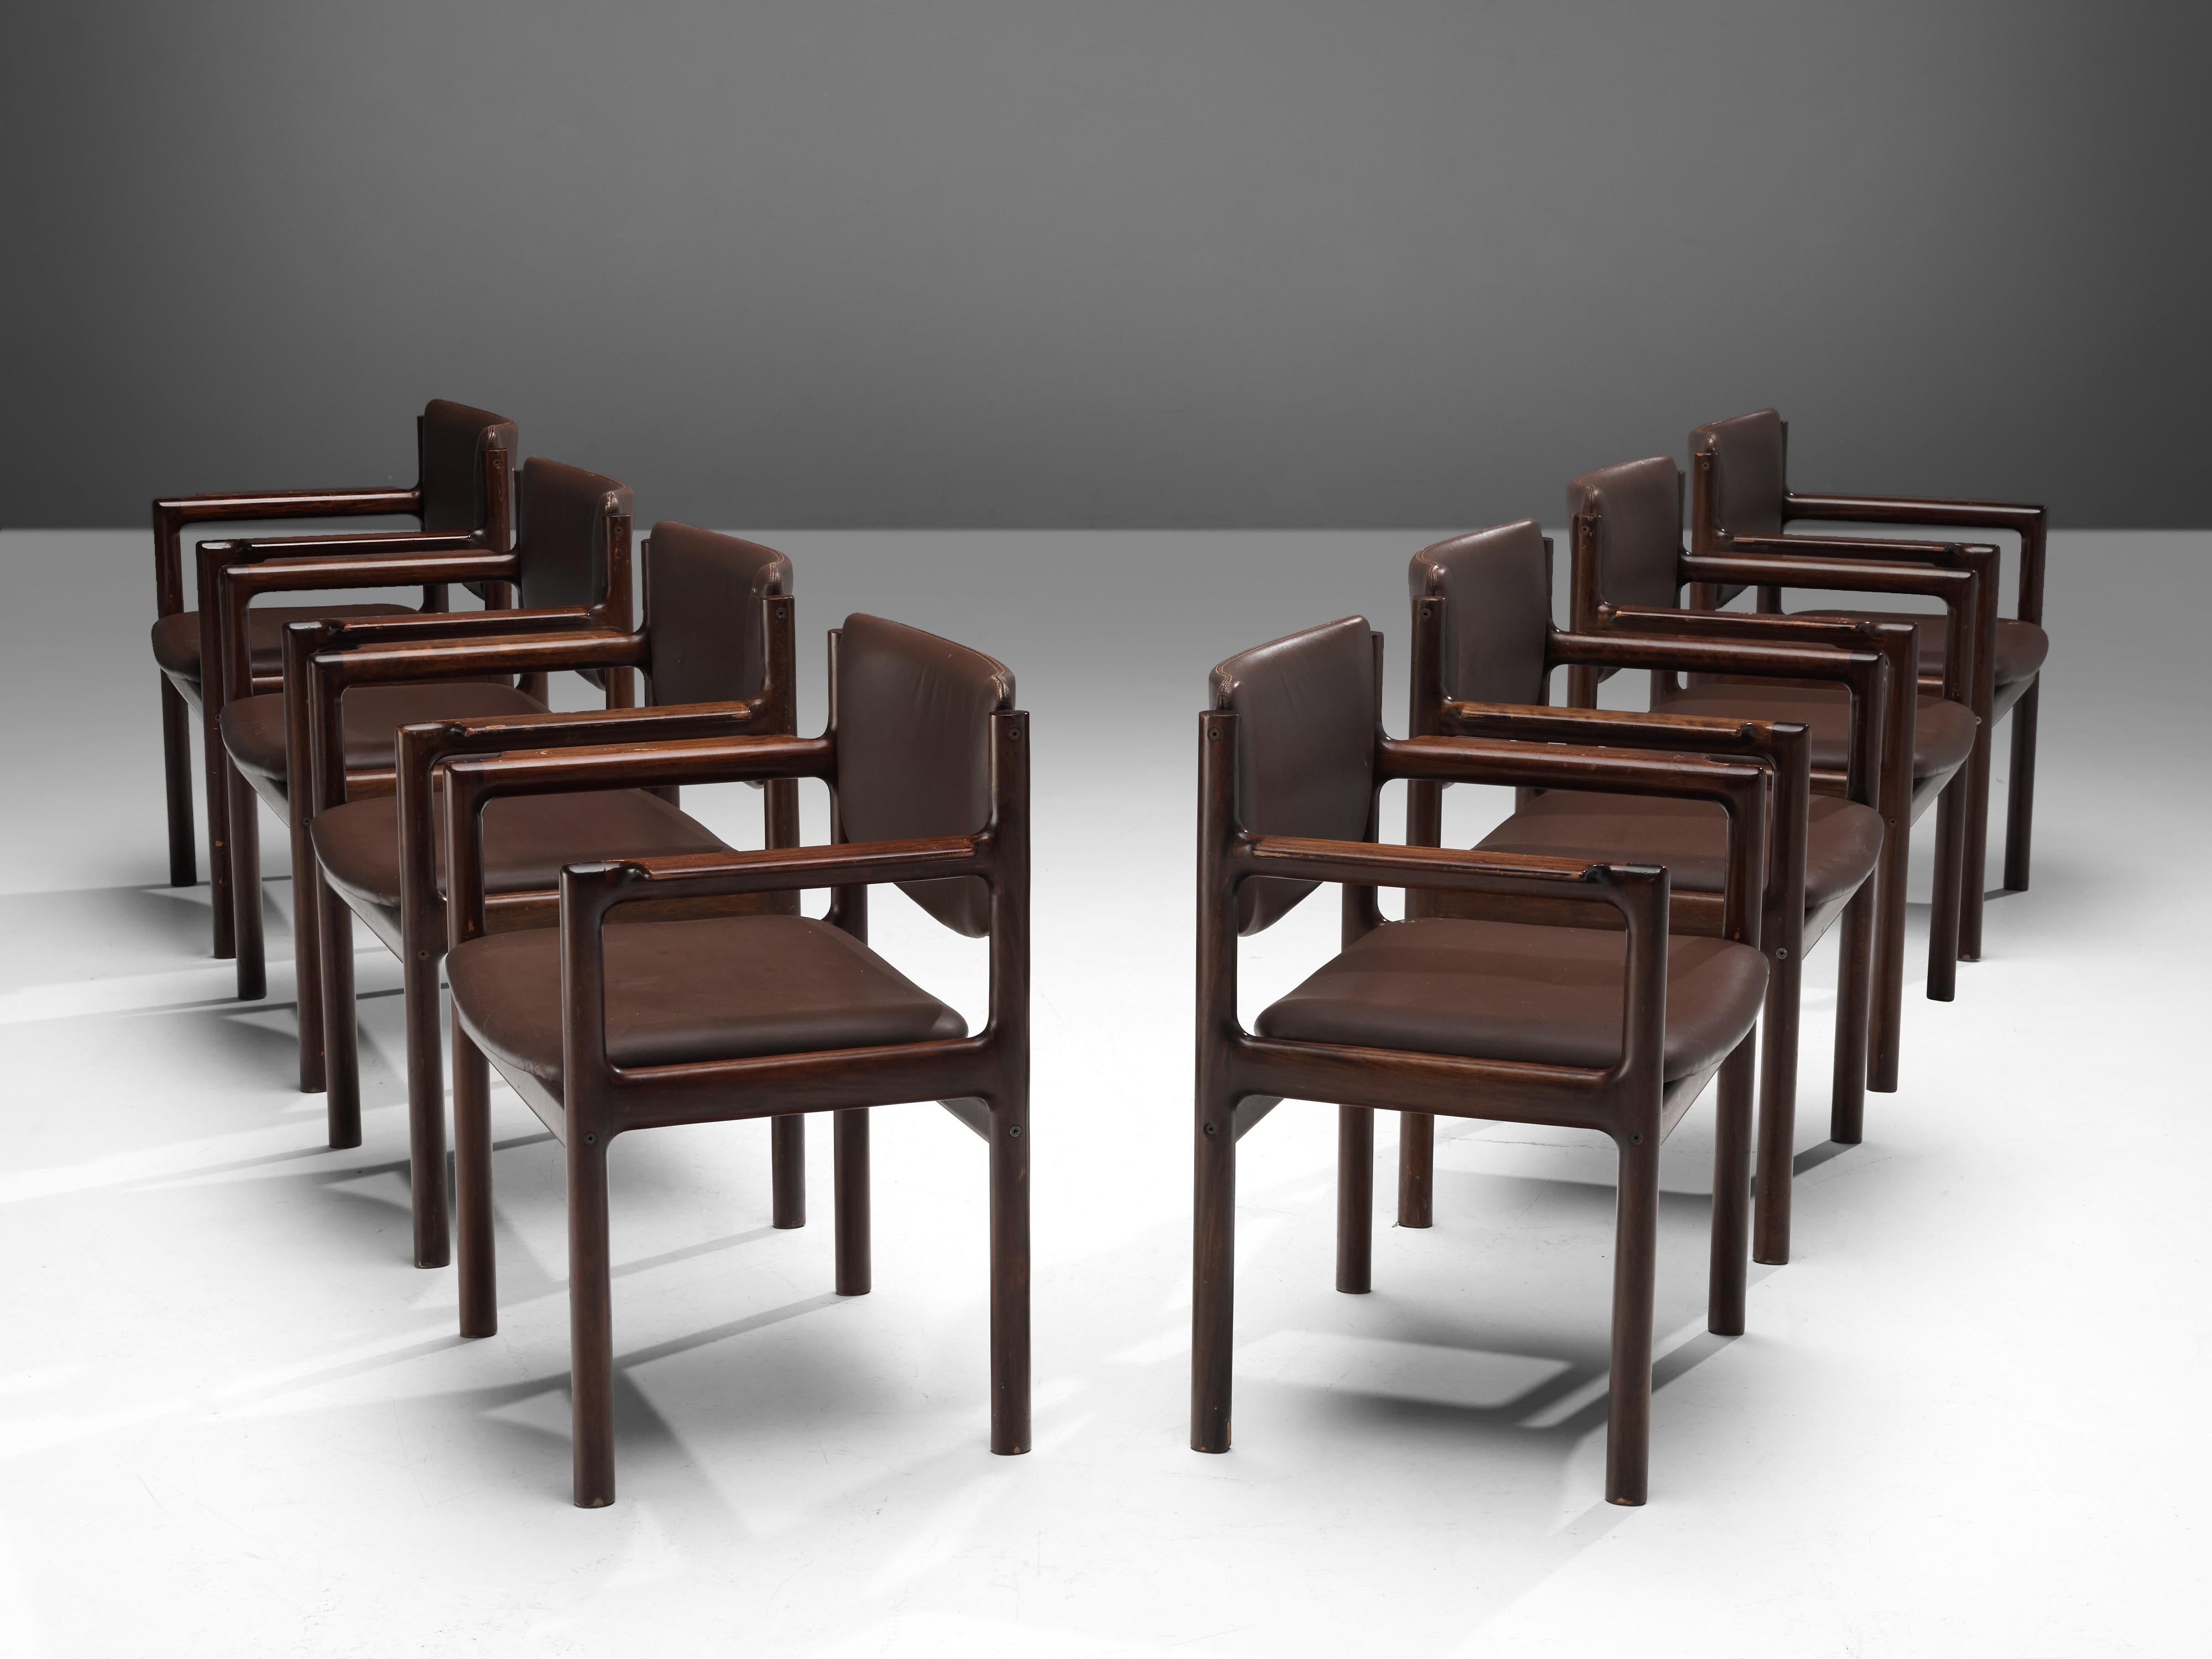 Set of eight armchairs, stained mahogany, leatherette, Denmark, 1960s.

The model of these chairs is angular and modest as it is build up in mainly horizontal and vertical lines. The clear, angular shapes are giving these chairs a strong appearance.